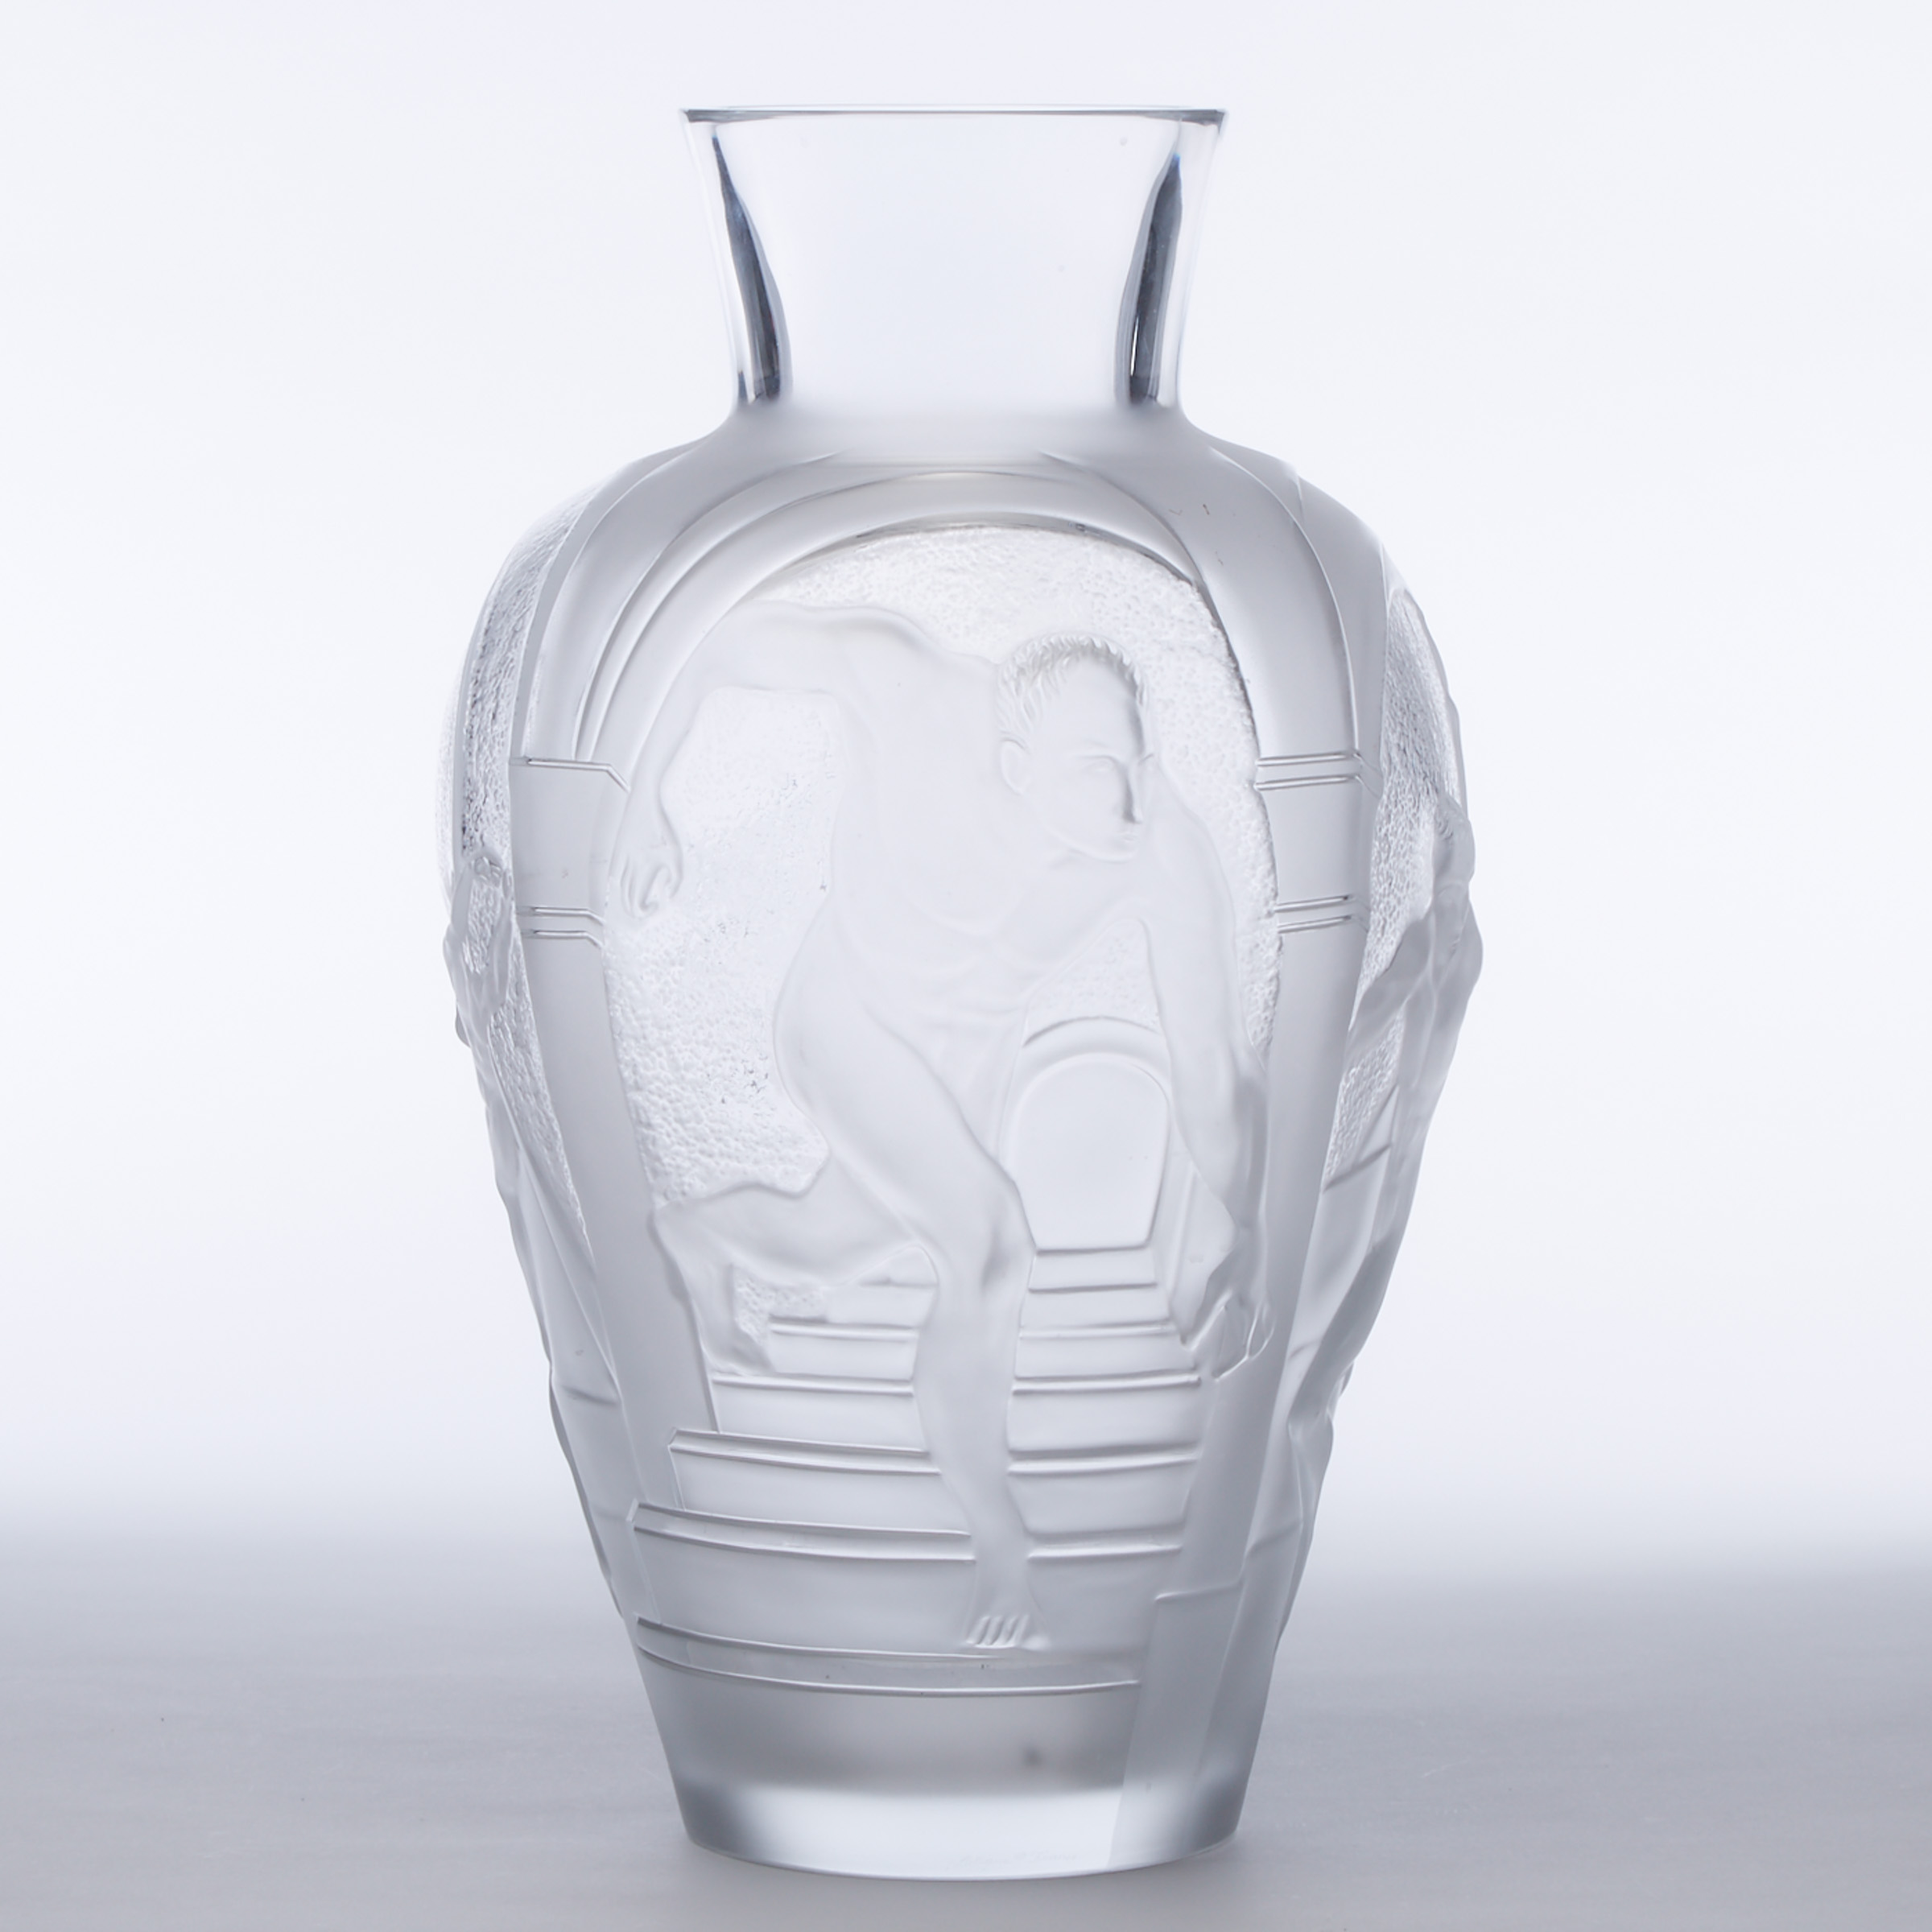 'Les Eleens', Lalique Moulded and Partly Frosted Glass Large Vase, c.1994